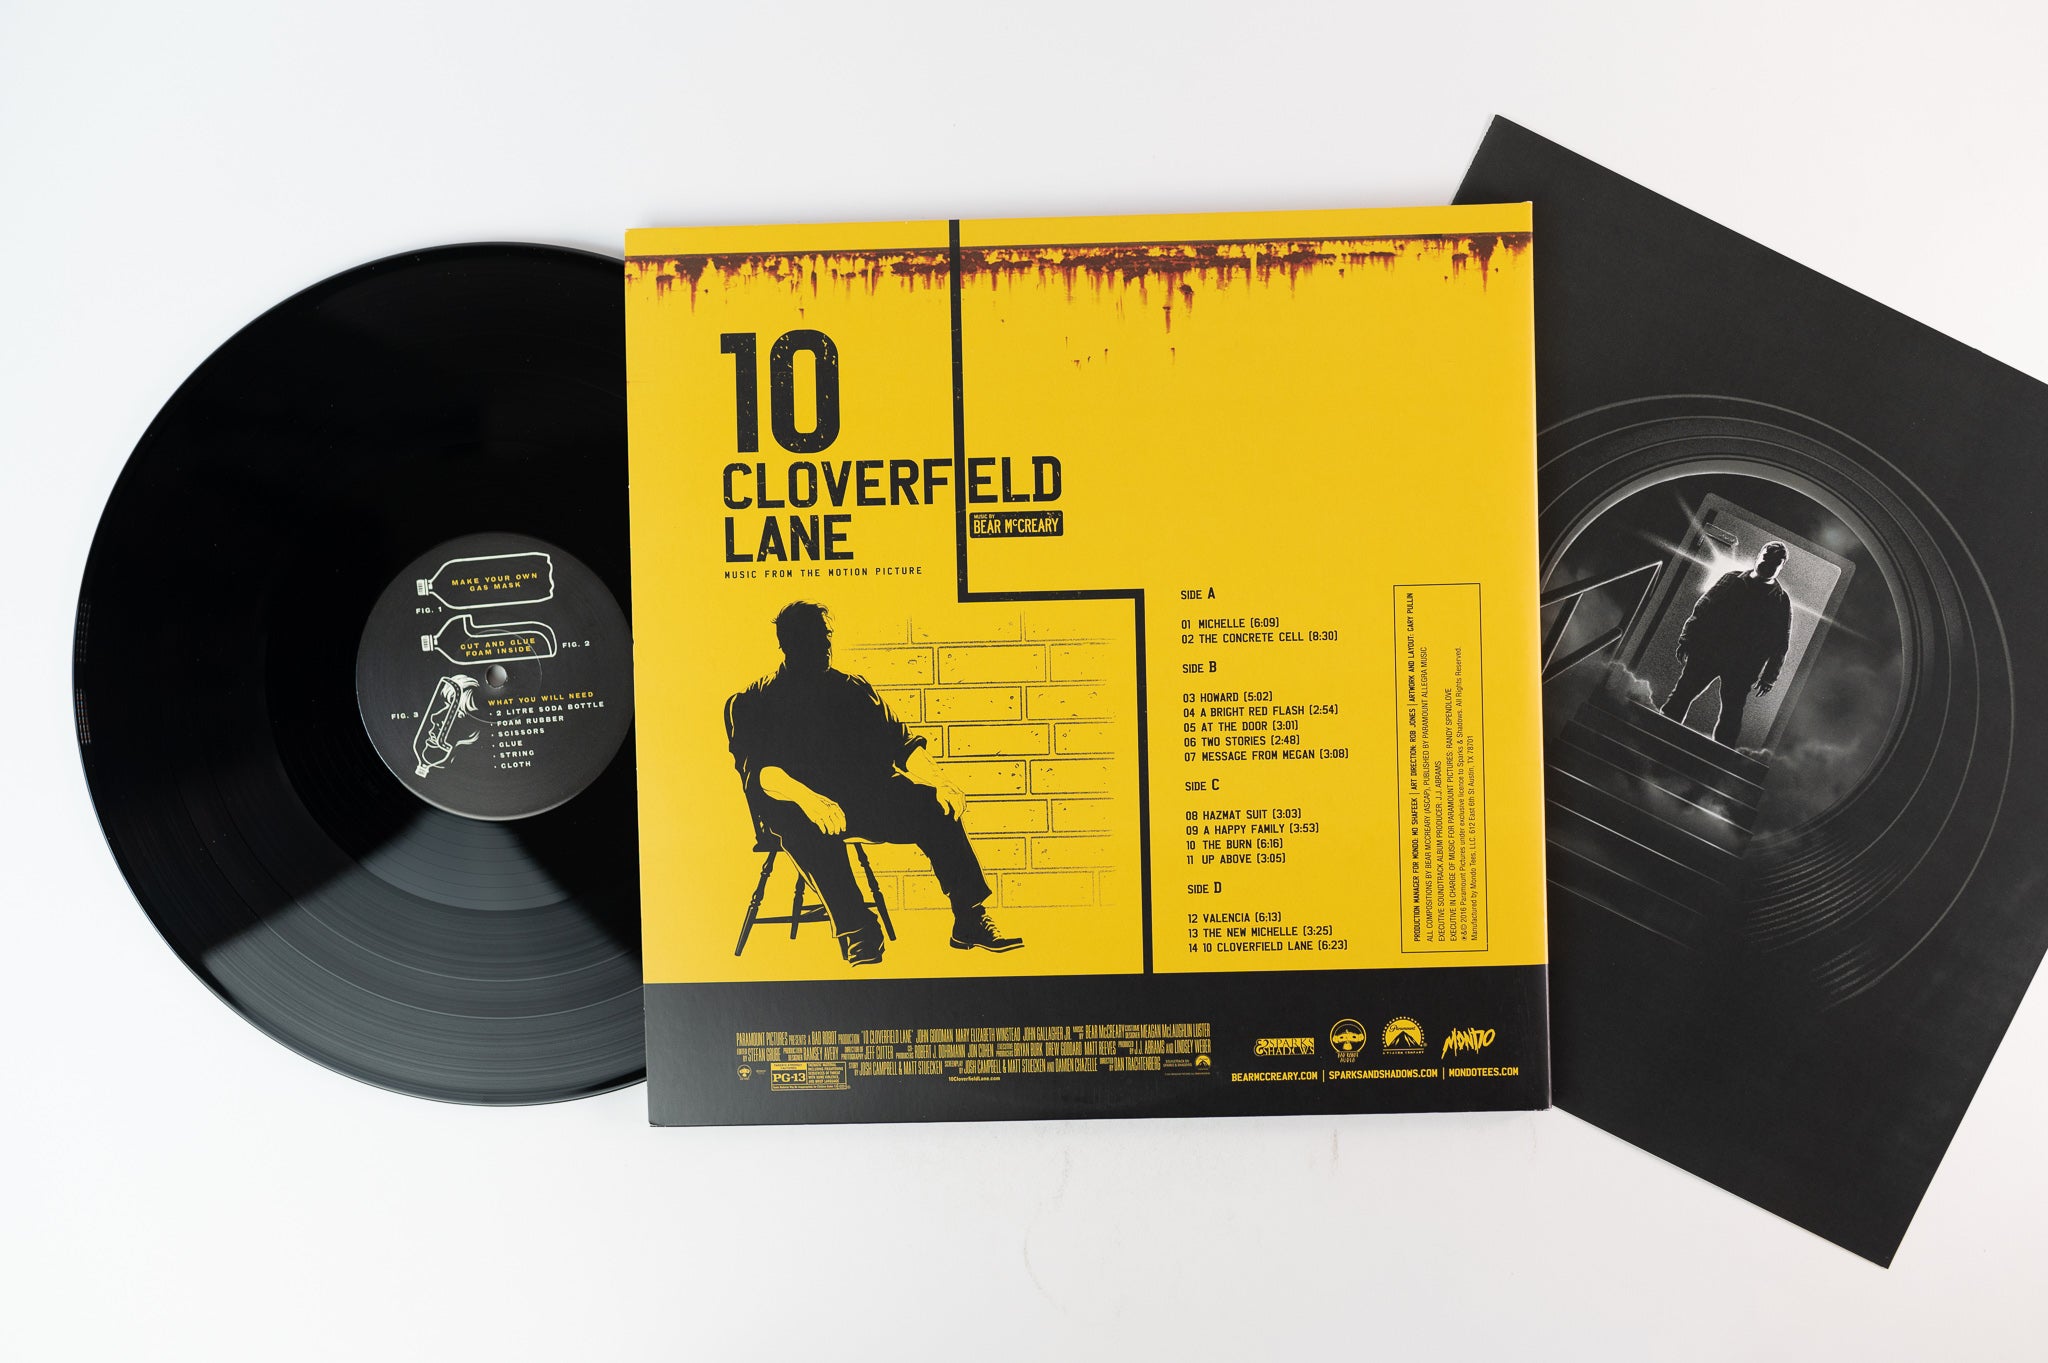 Bear McCreary - 10 Cloverfield Lane (Music From The Motion Picture) on Mondo